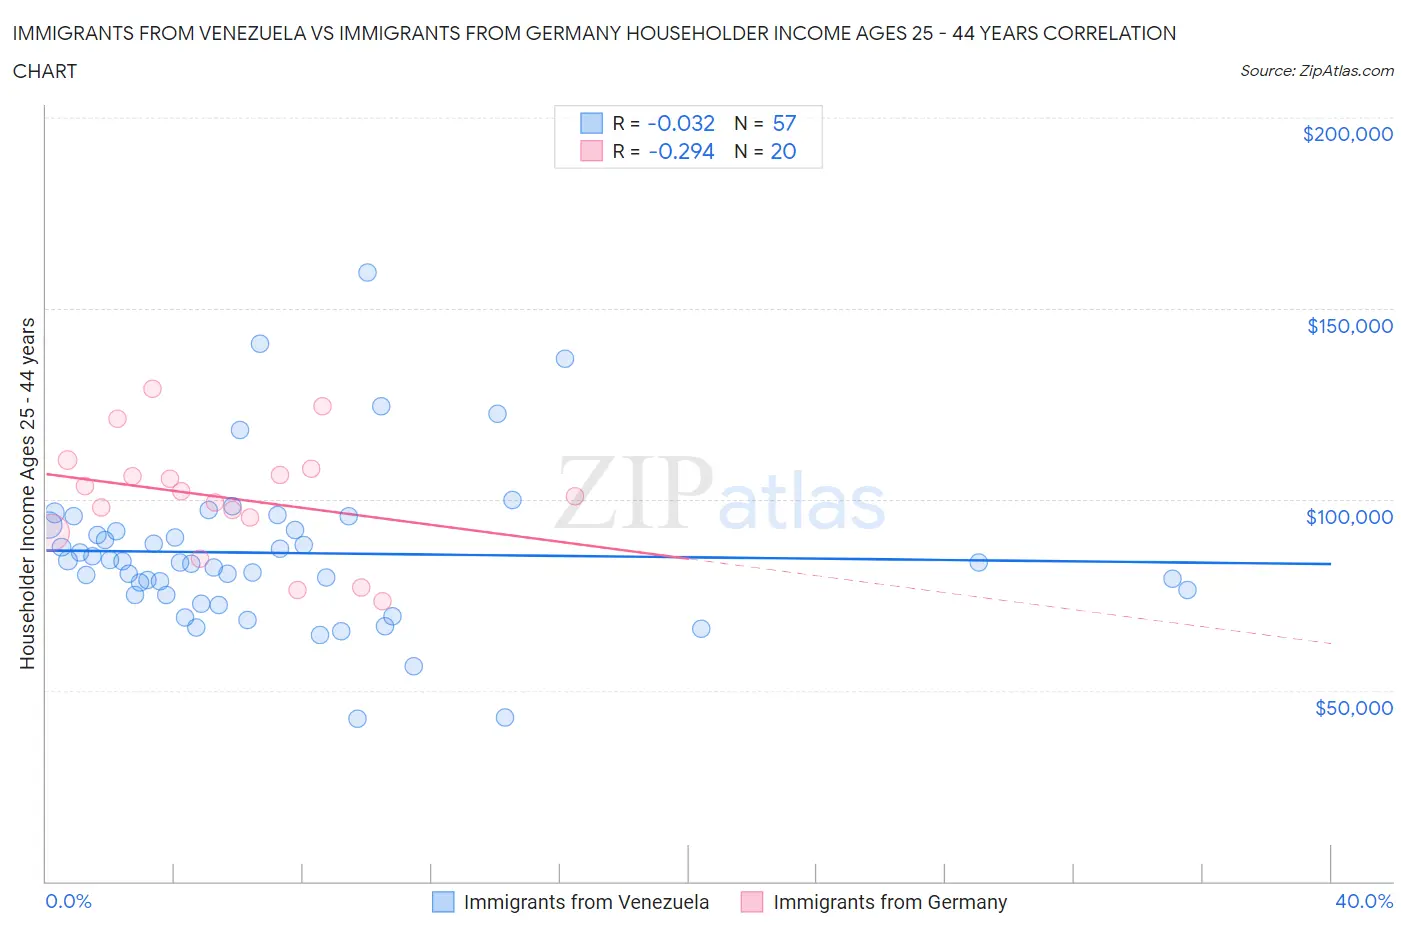 Immigrants from Venezuela vs Immigrants from Germany Householder Income Ages 25 - 44 years